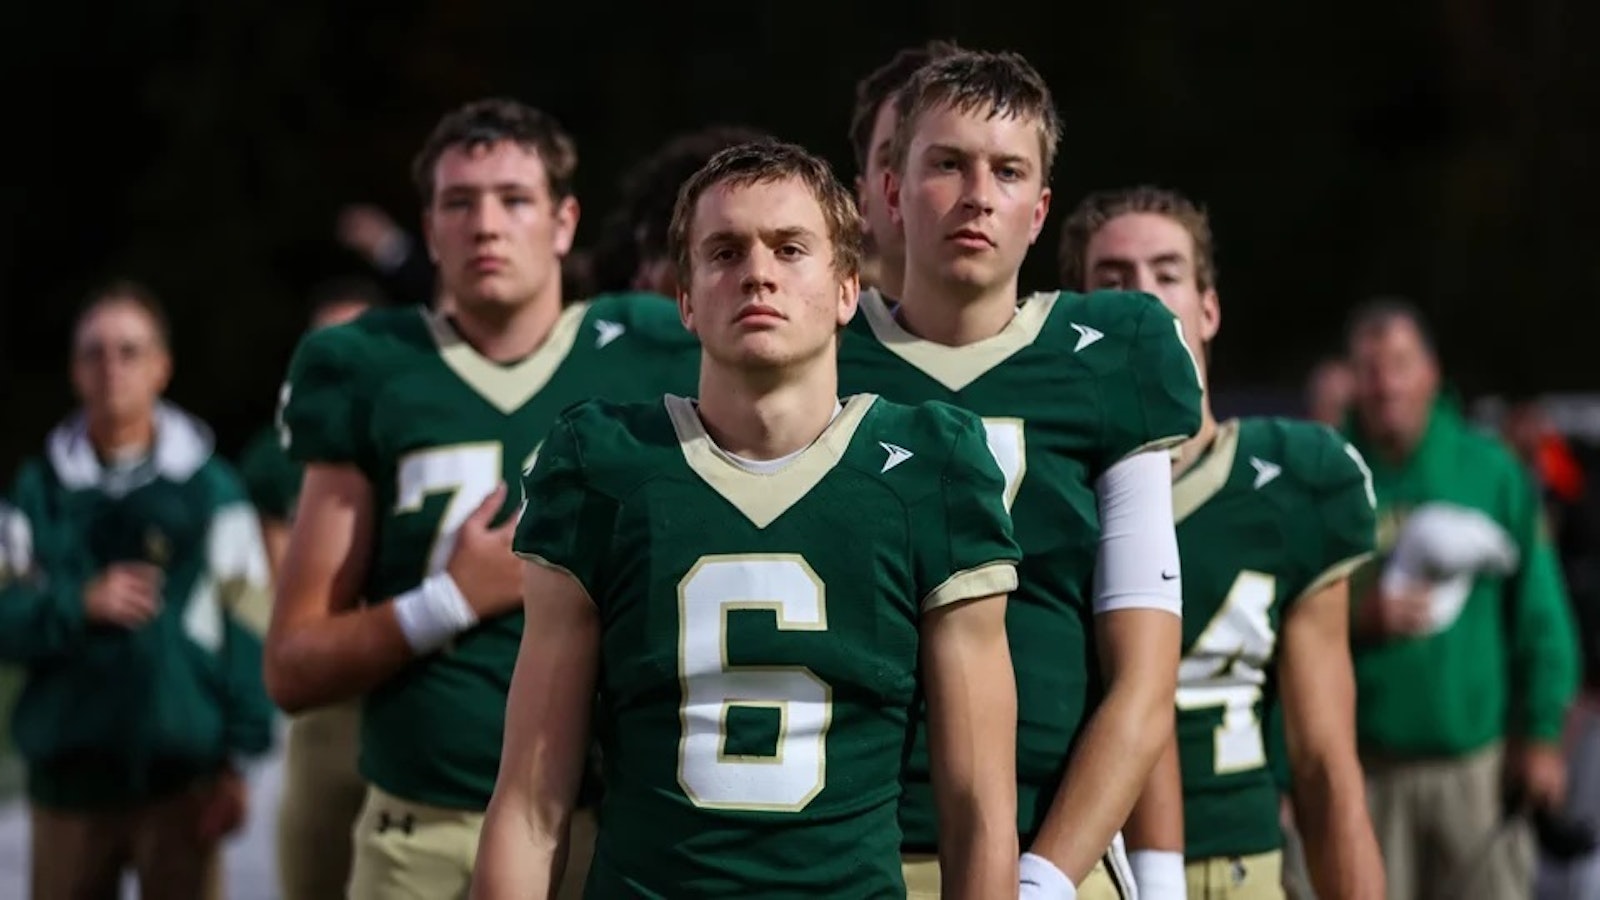 Besides adding five Toledo high schools, the Catholic High School league may expand further in 2023-24 if the league's executive board accepts the application of Jackson Lumen Christi.